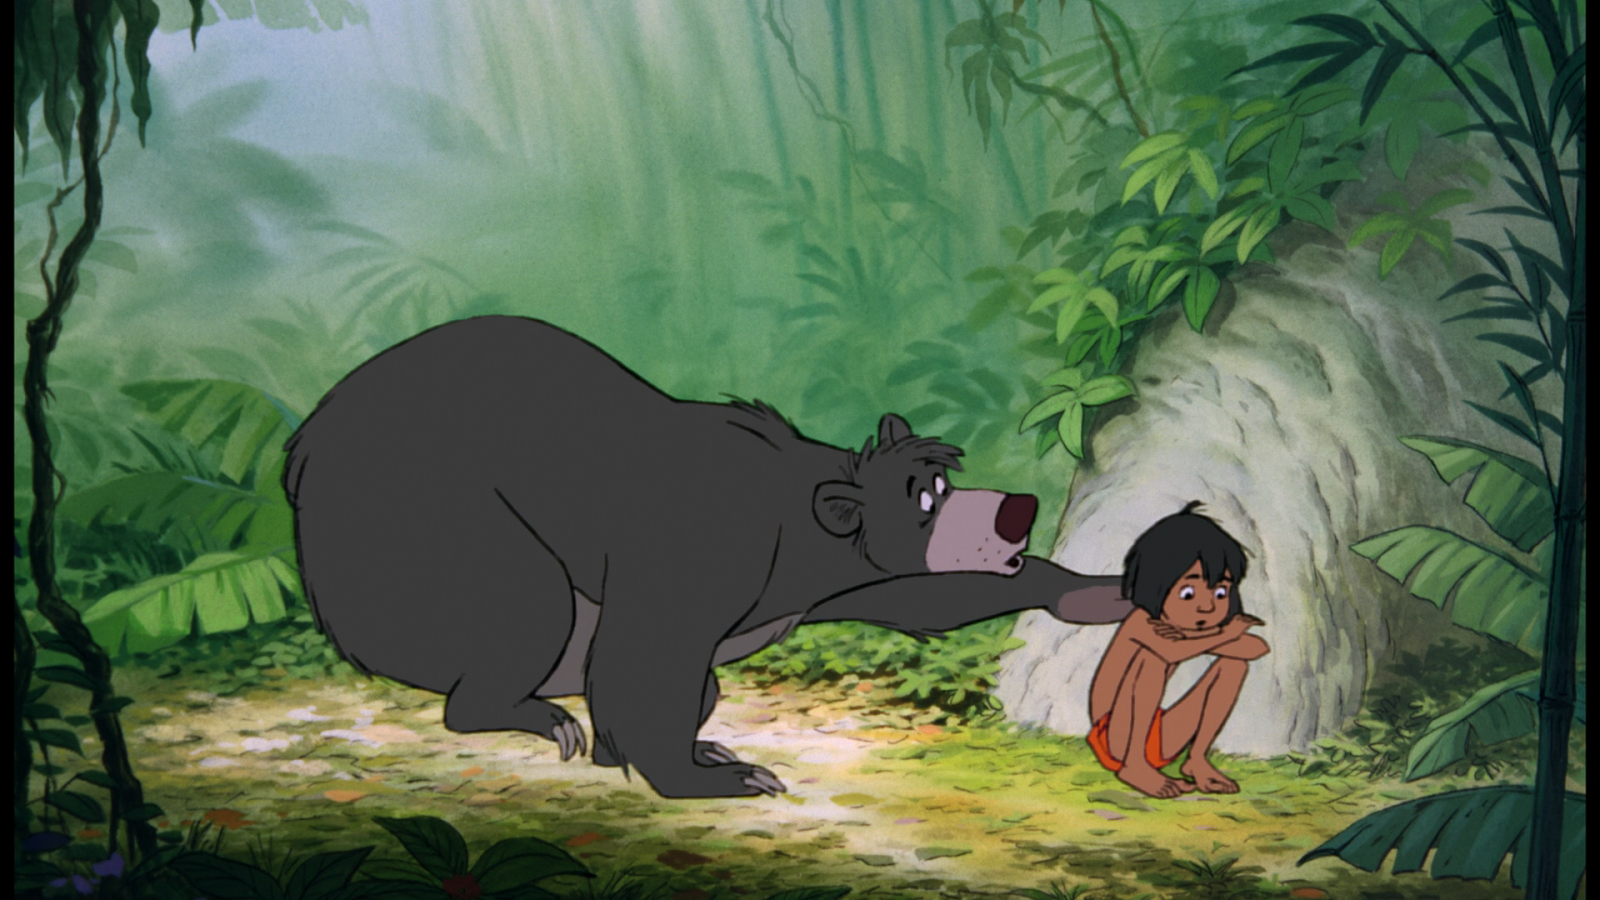 As a leader, you cannot give ‘the bare necessities’ to your team. (Source: Disney)